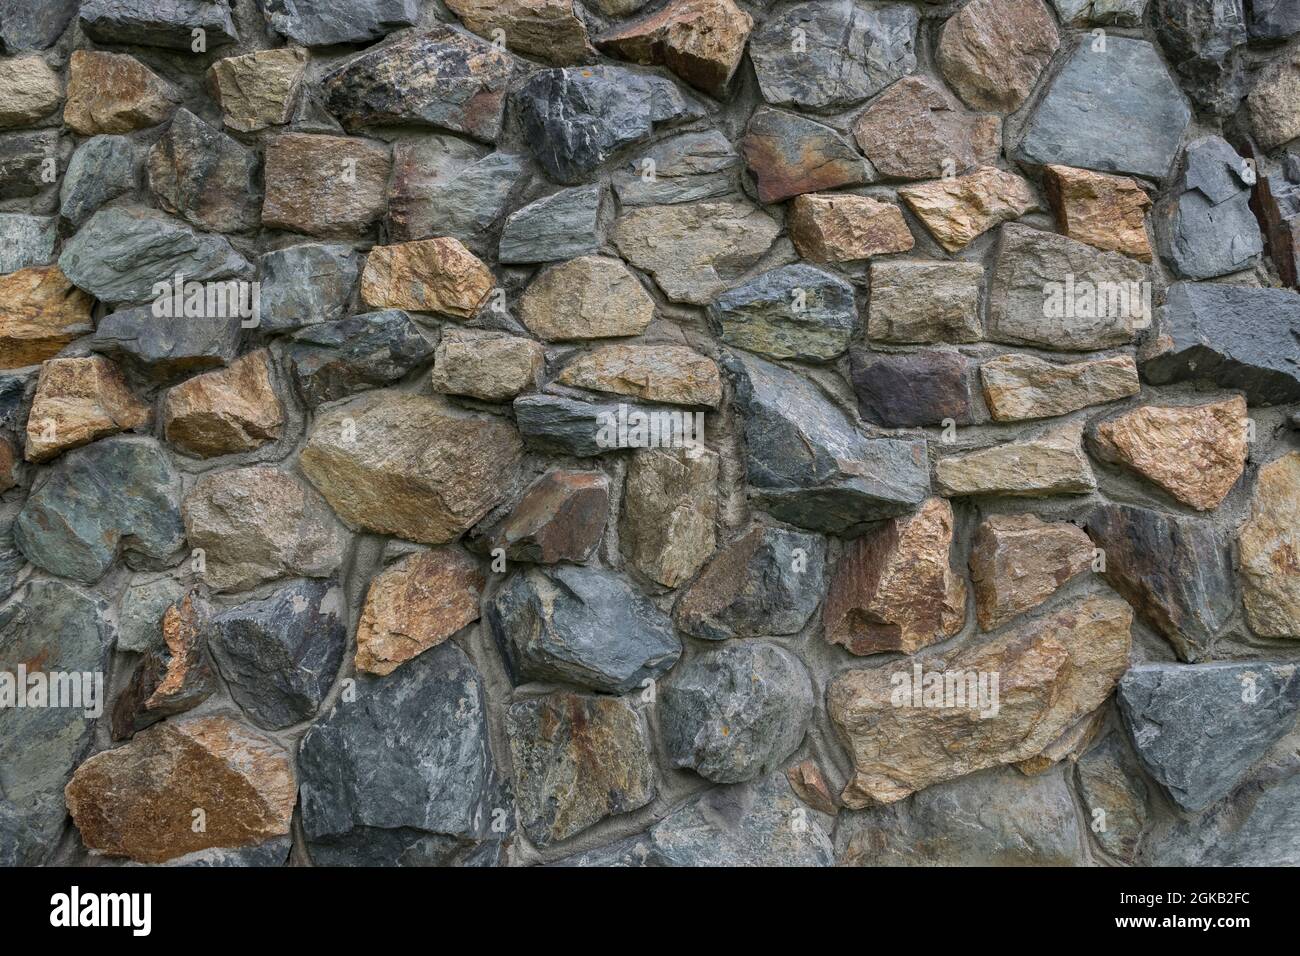 Stone wall exterior texture. Old stone wall with varying sizes , shapes and colored of stones. Stock Photo